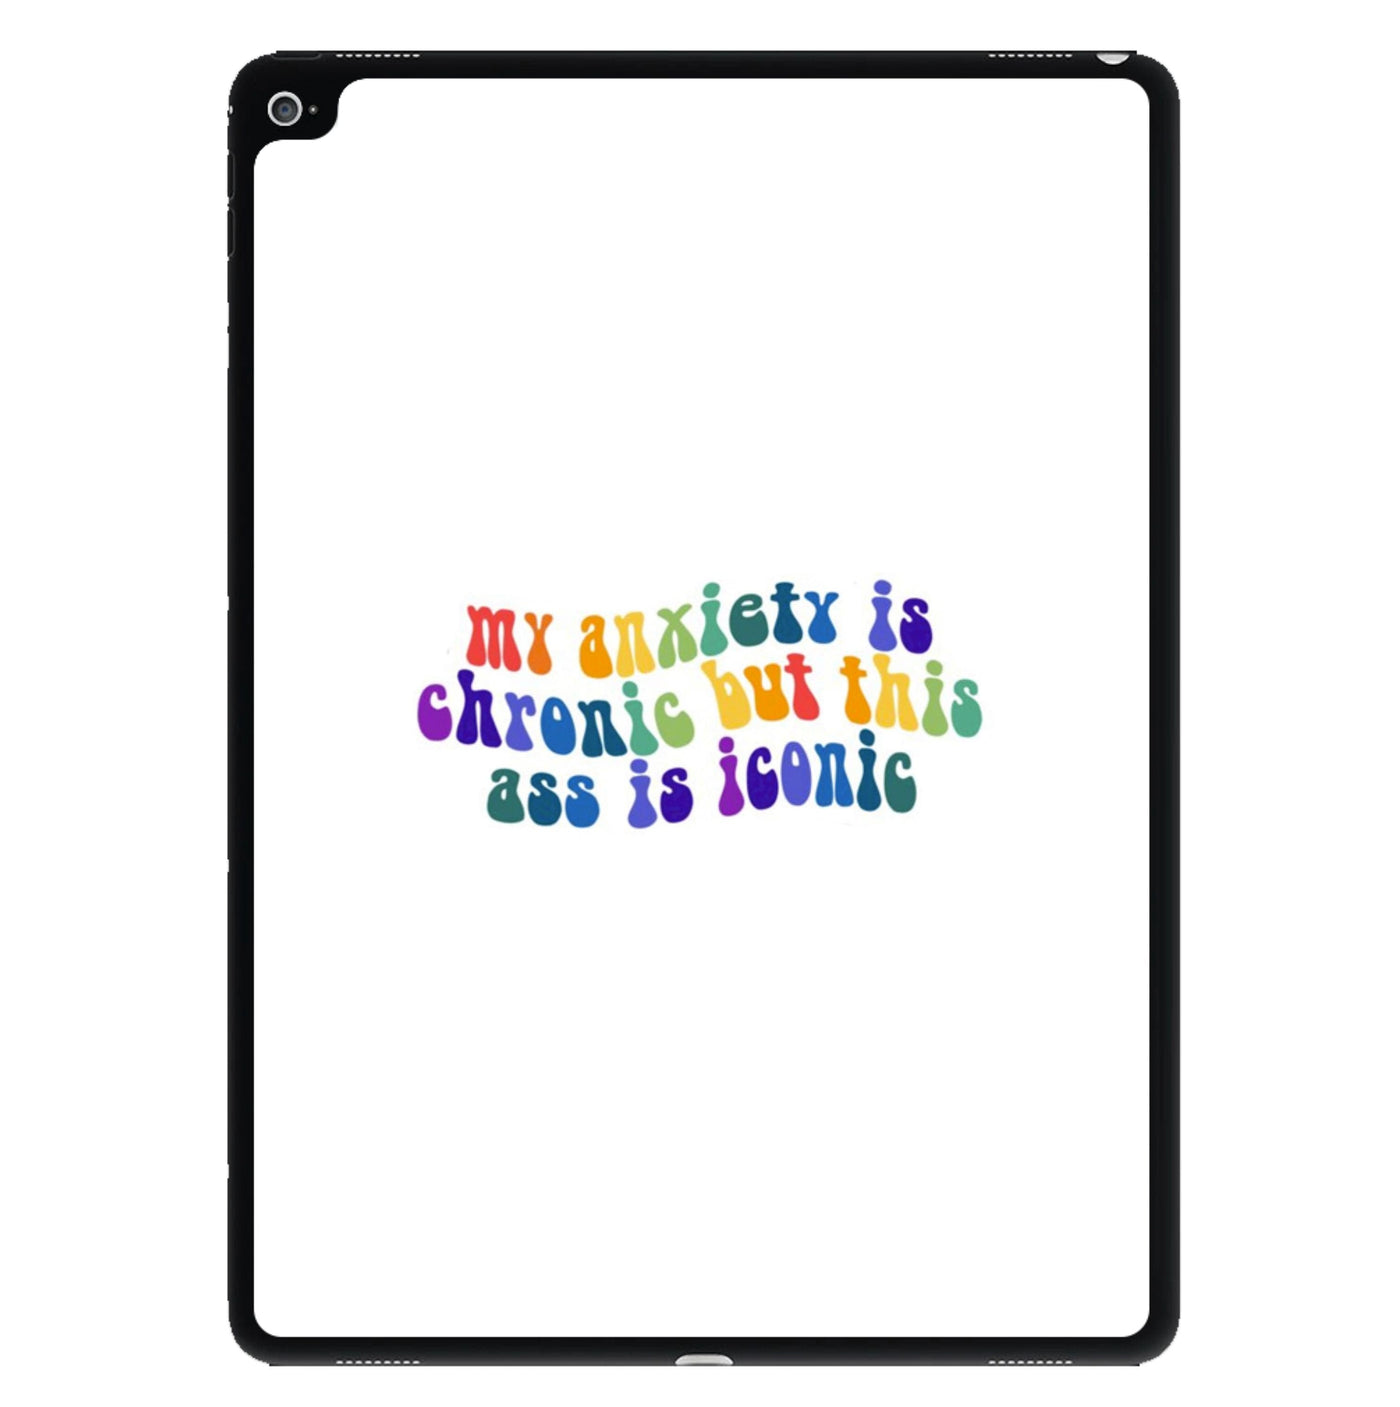 My Anxiety Is Chronic But This Ass Is Iconic - TikTok iPad Case